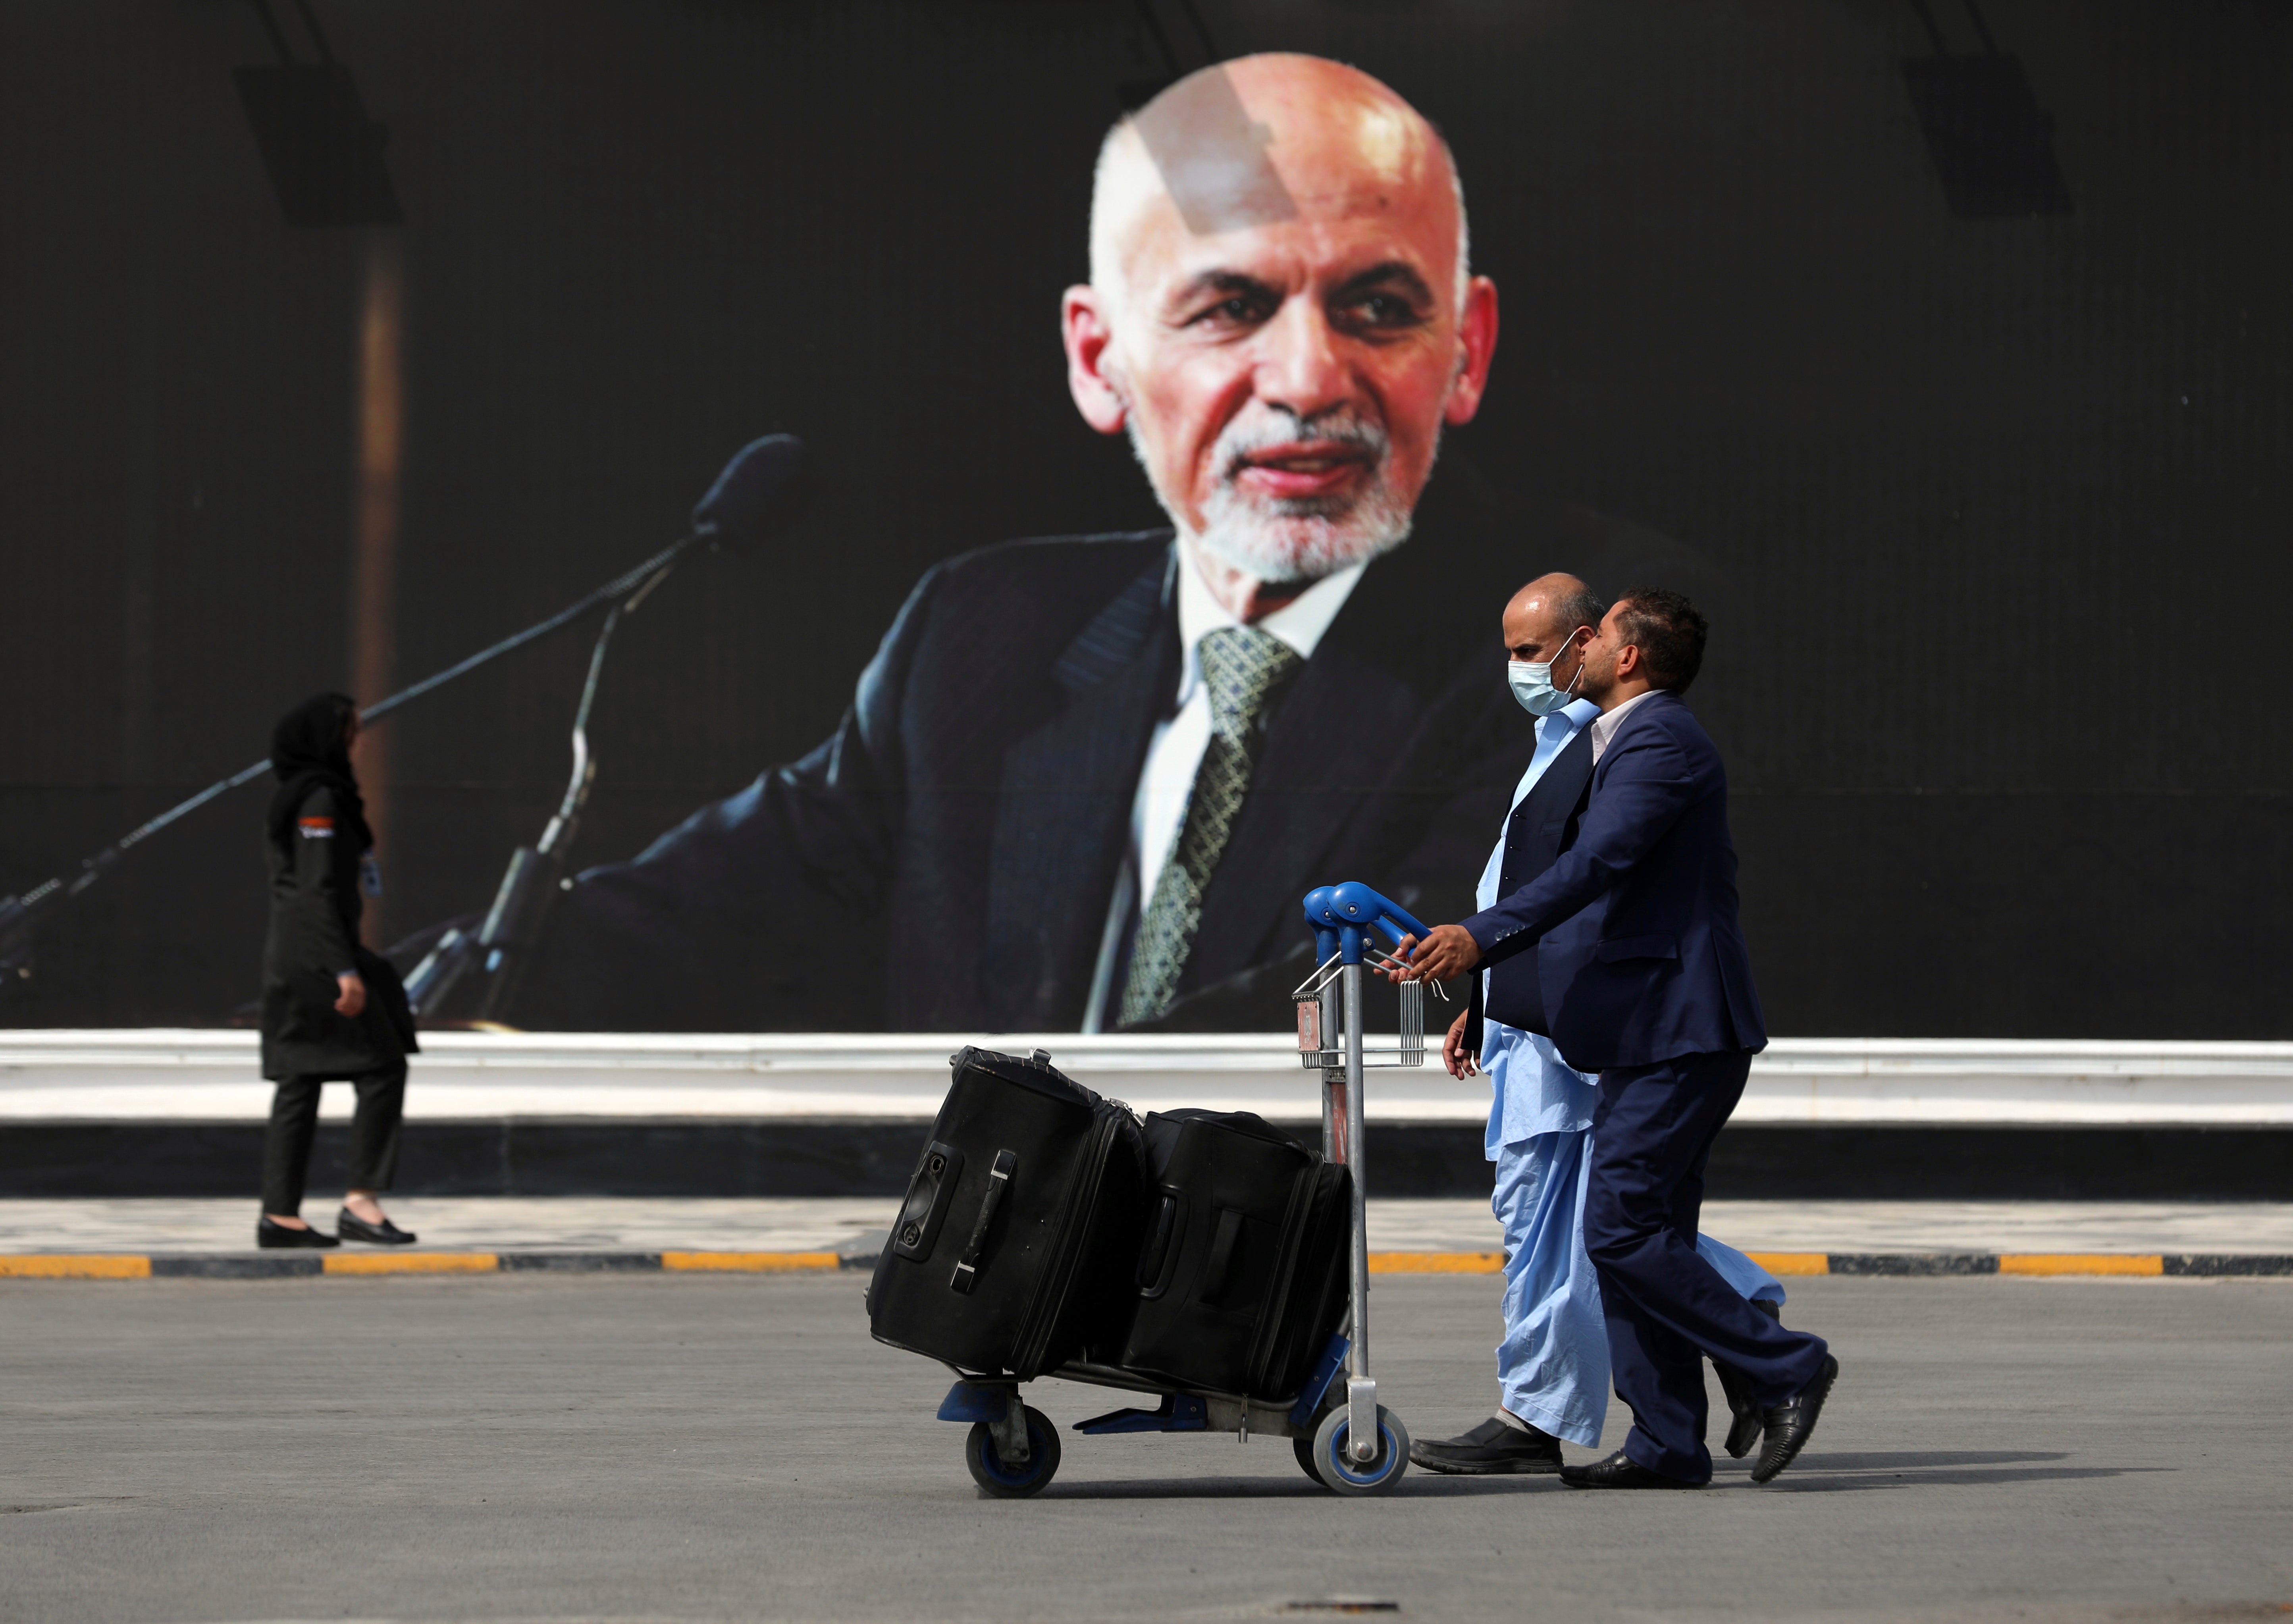 Ashraf Ghani offered his second apology to the people of Afghanistan following his departure to UAE